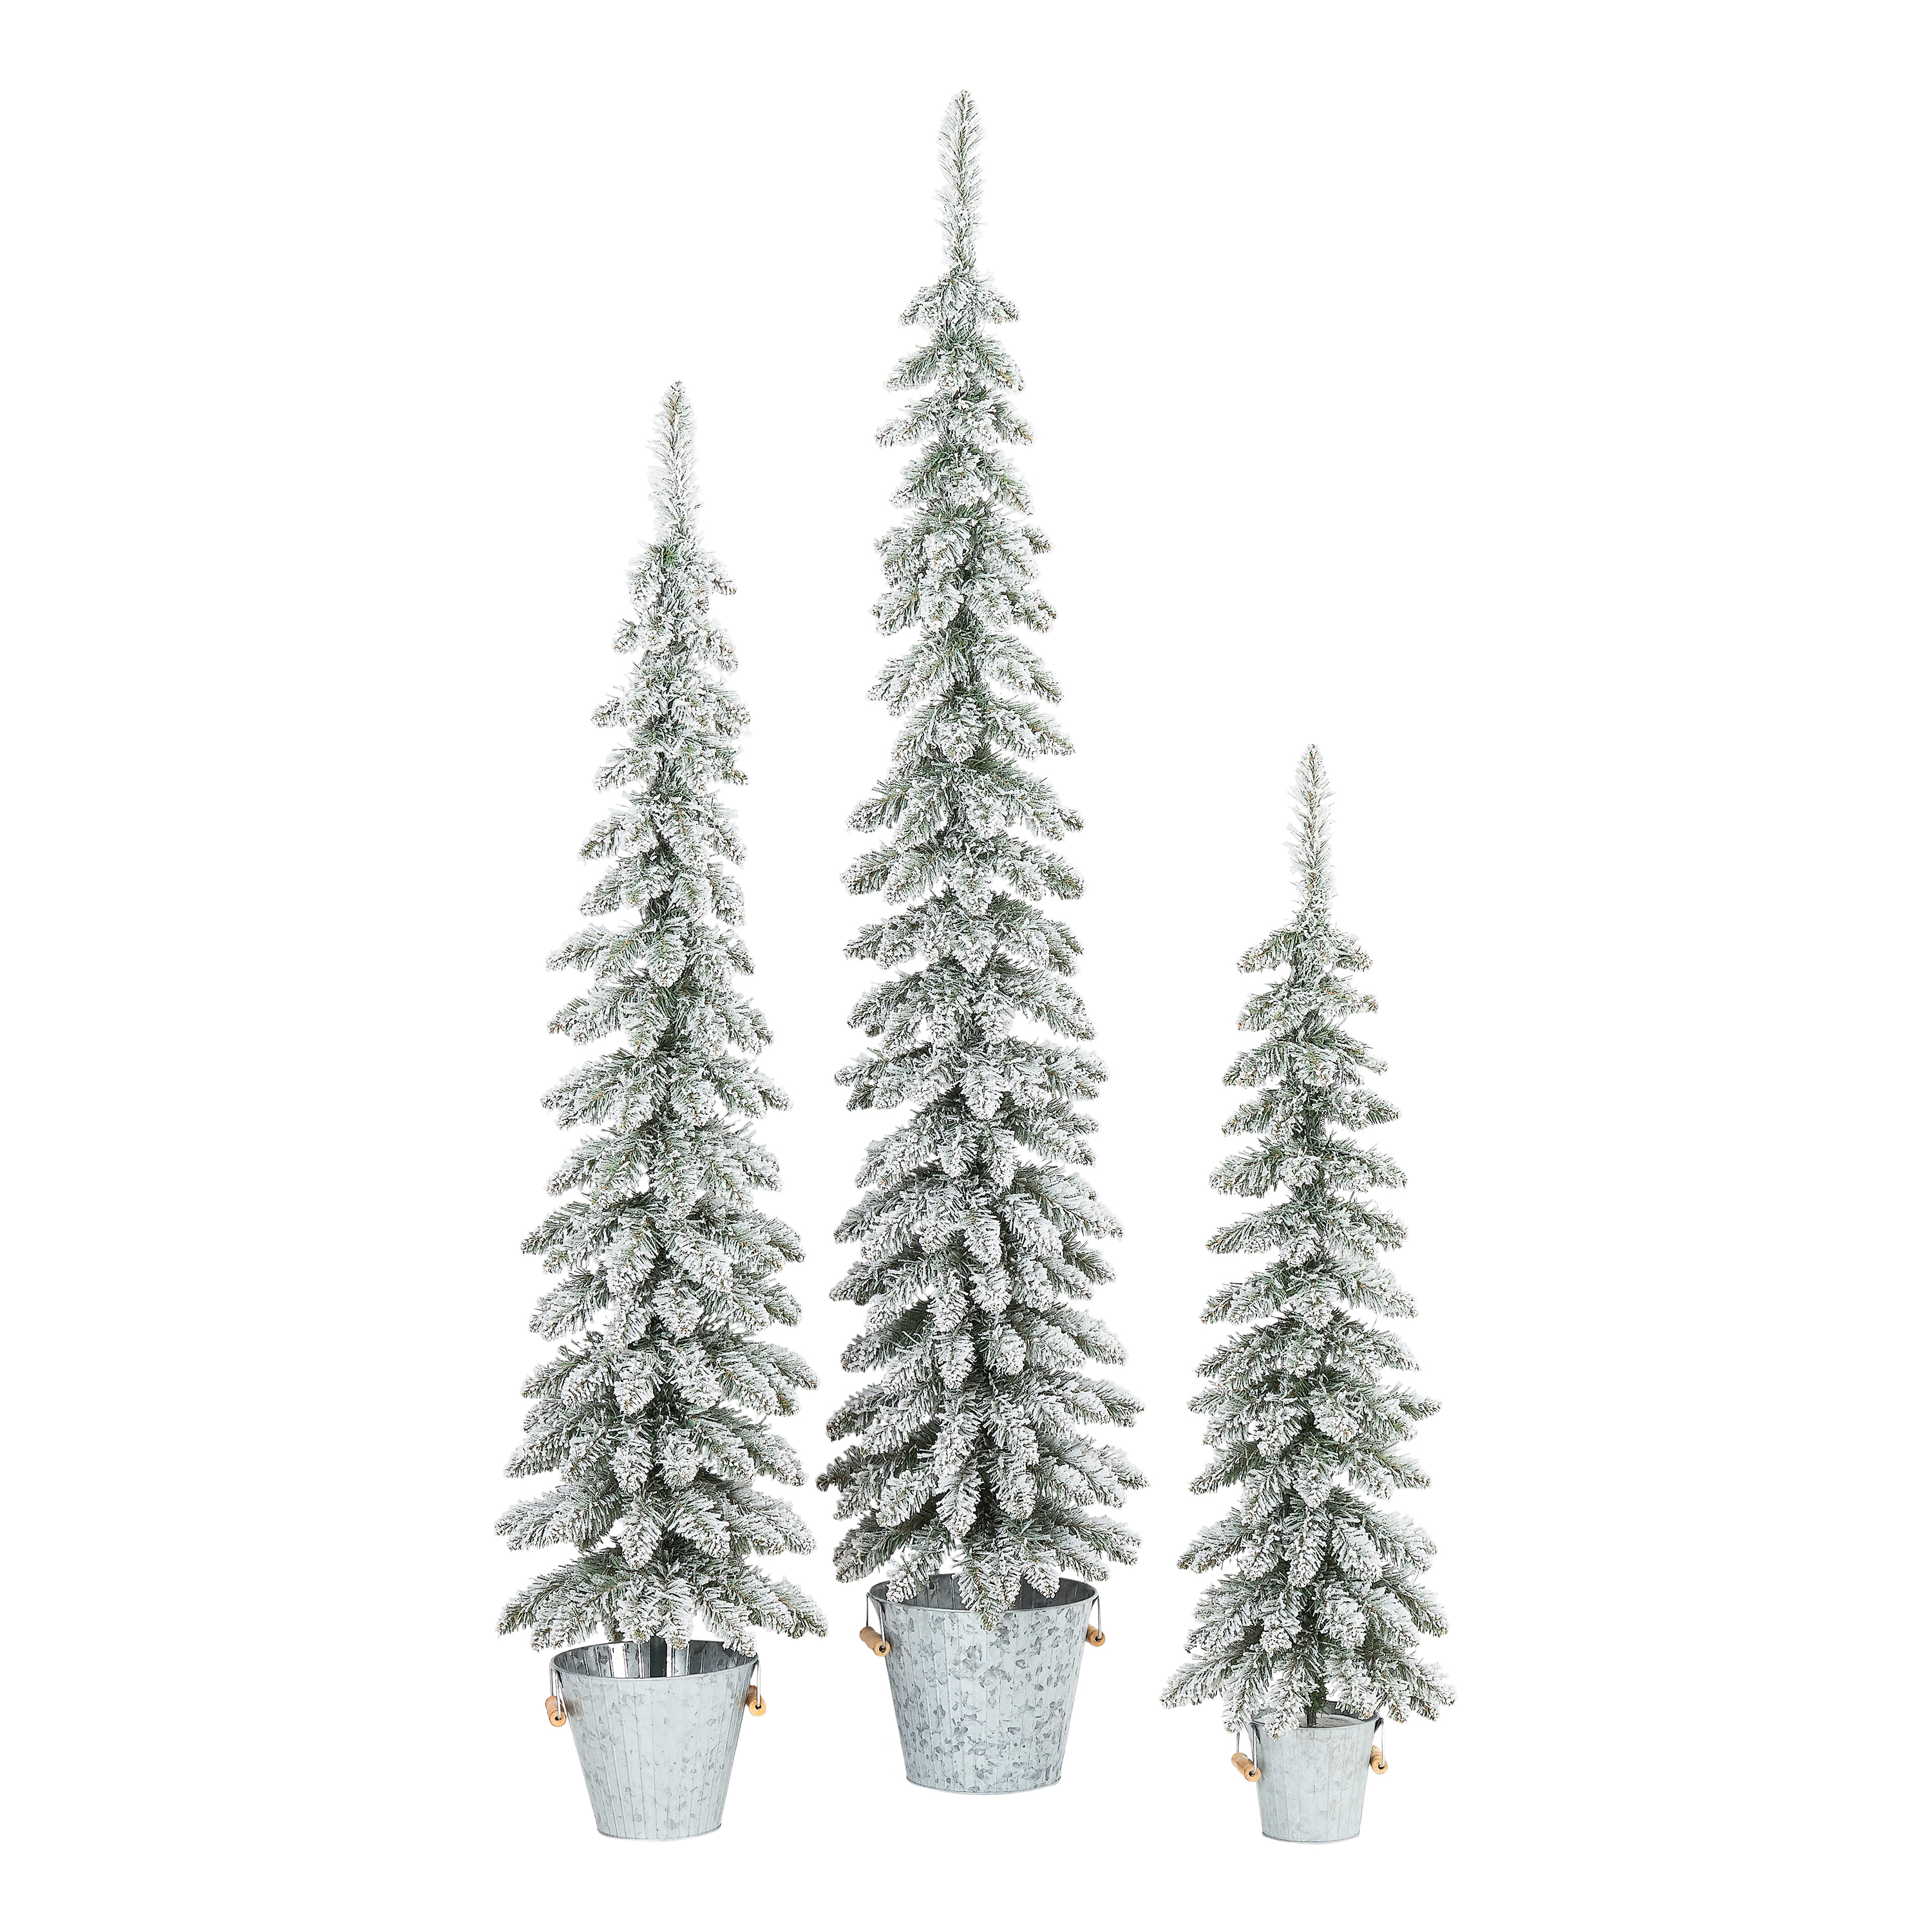 Holiday Time Flocked Pine Tree with Galvanized Bucket Set of 3 - image 1 of 6